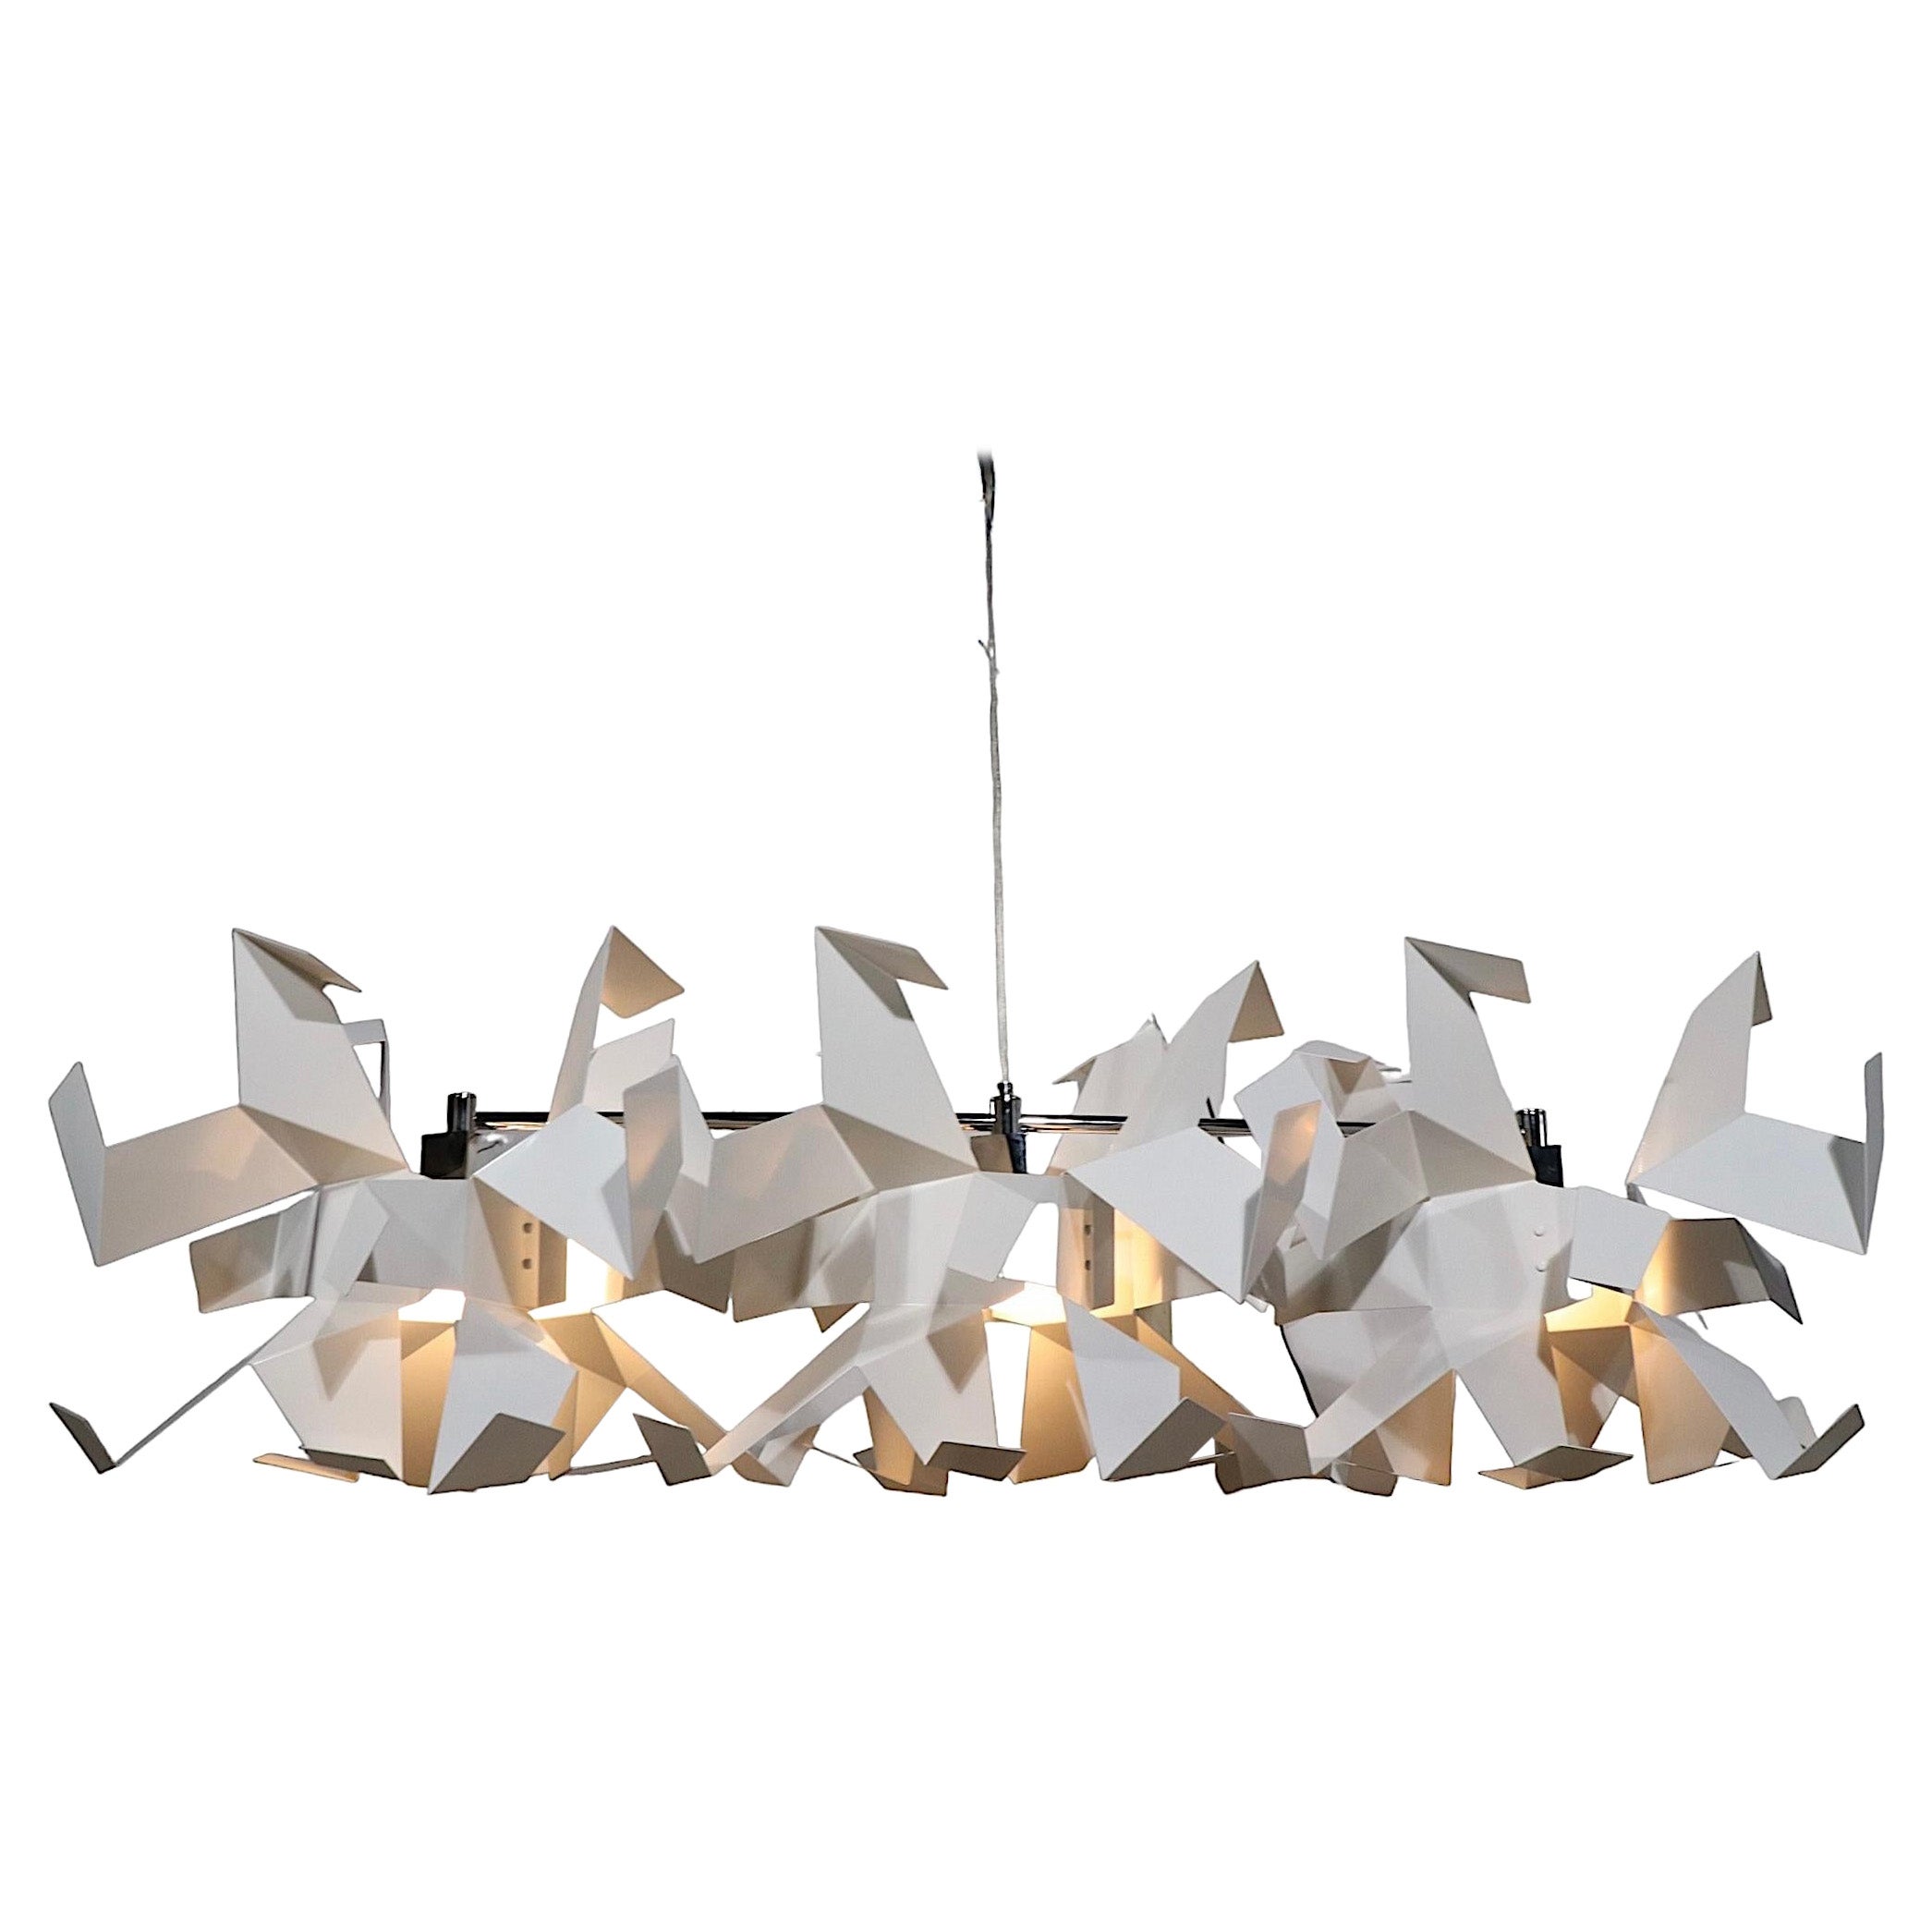 Architectural Scale Glow Chandeliers Made in Italy by Pallucco circa 2000-2010 For Sale